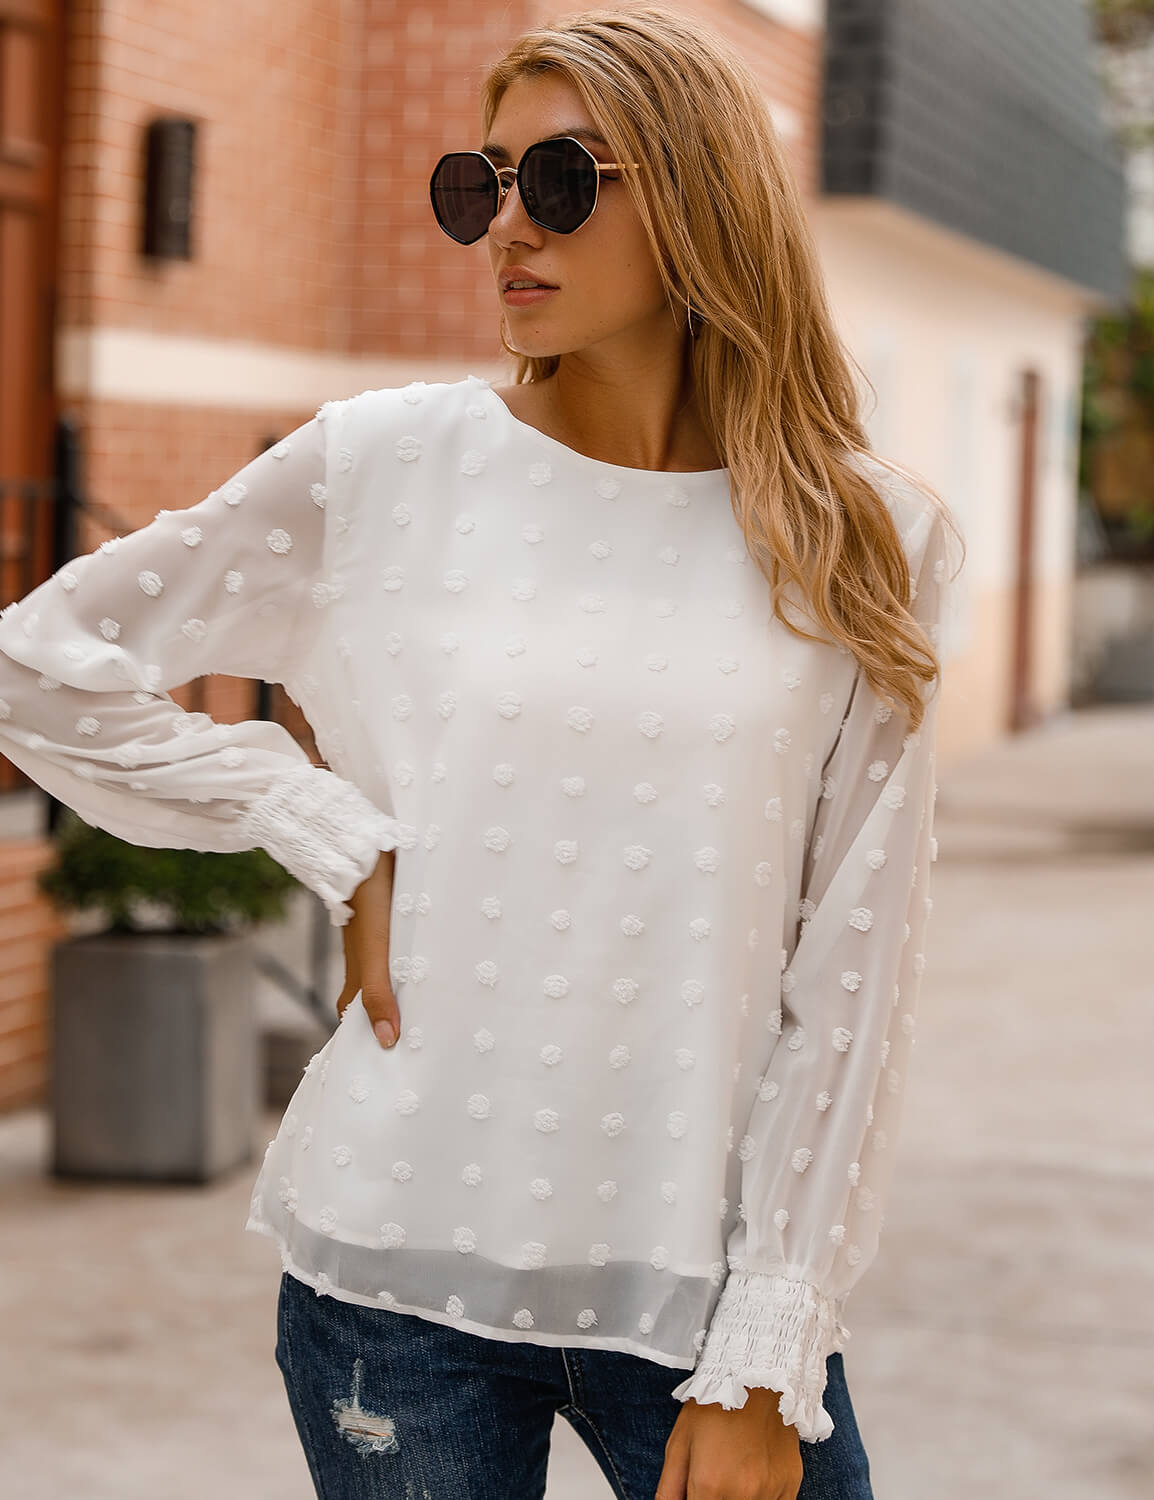 Blooming Jelly_Chic Puff Sleeves Dotted Layered Blouse_Pom Pom Details_153463_19_Elegant Women Fashion Outfits_Tops_Blouse